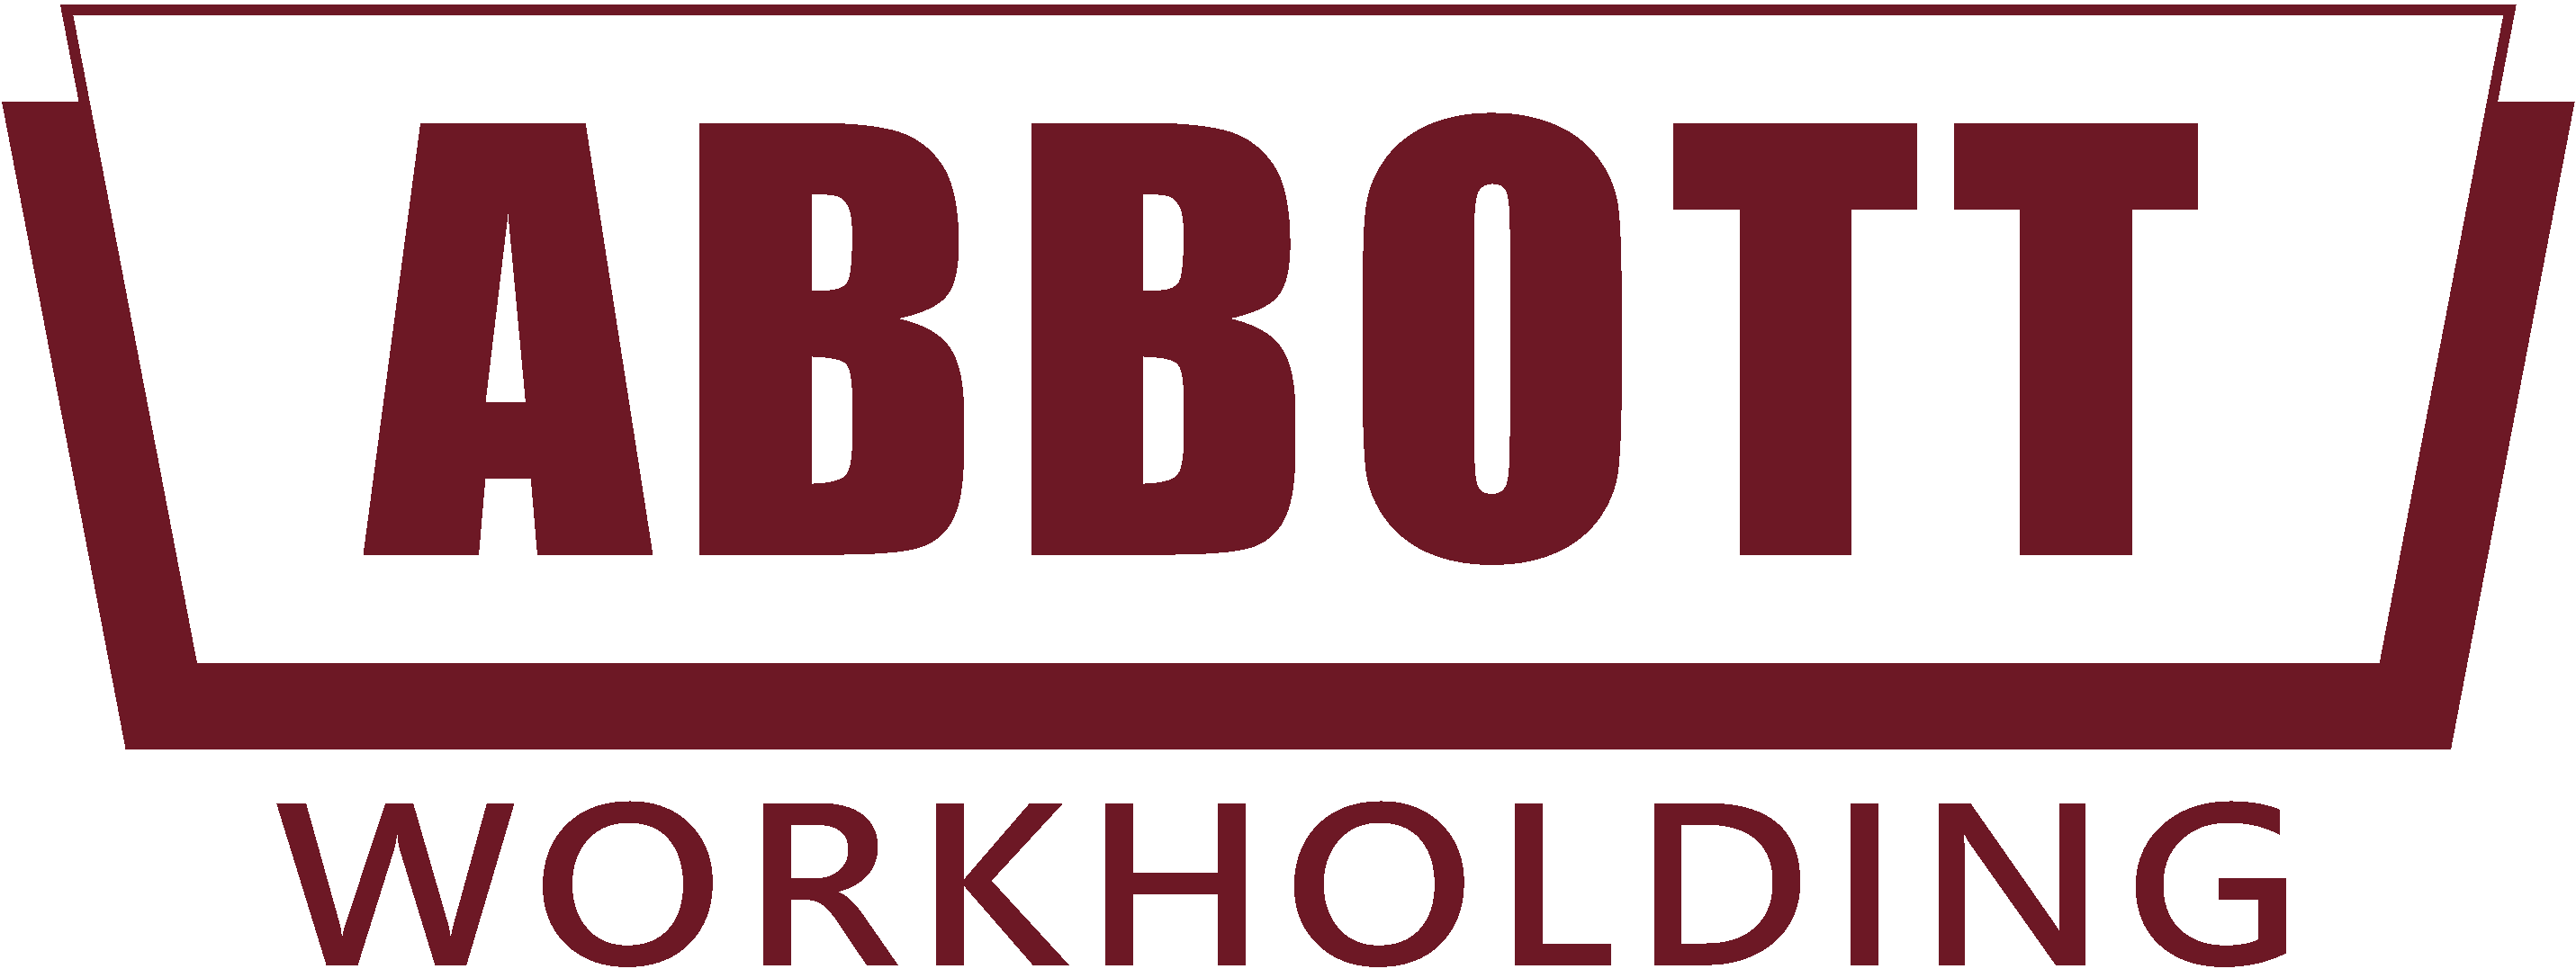 Abbott Workholding Products